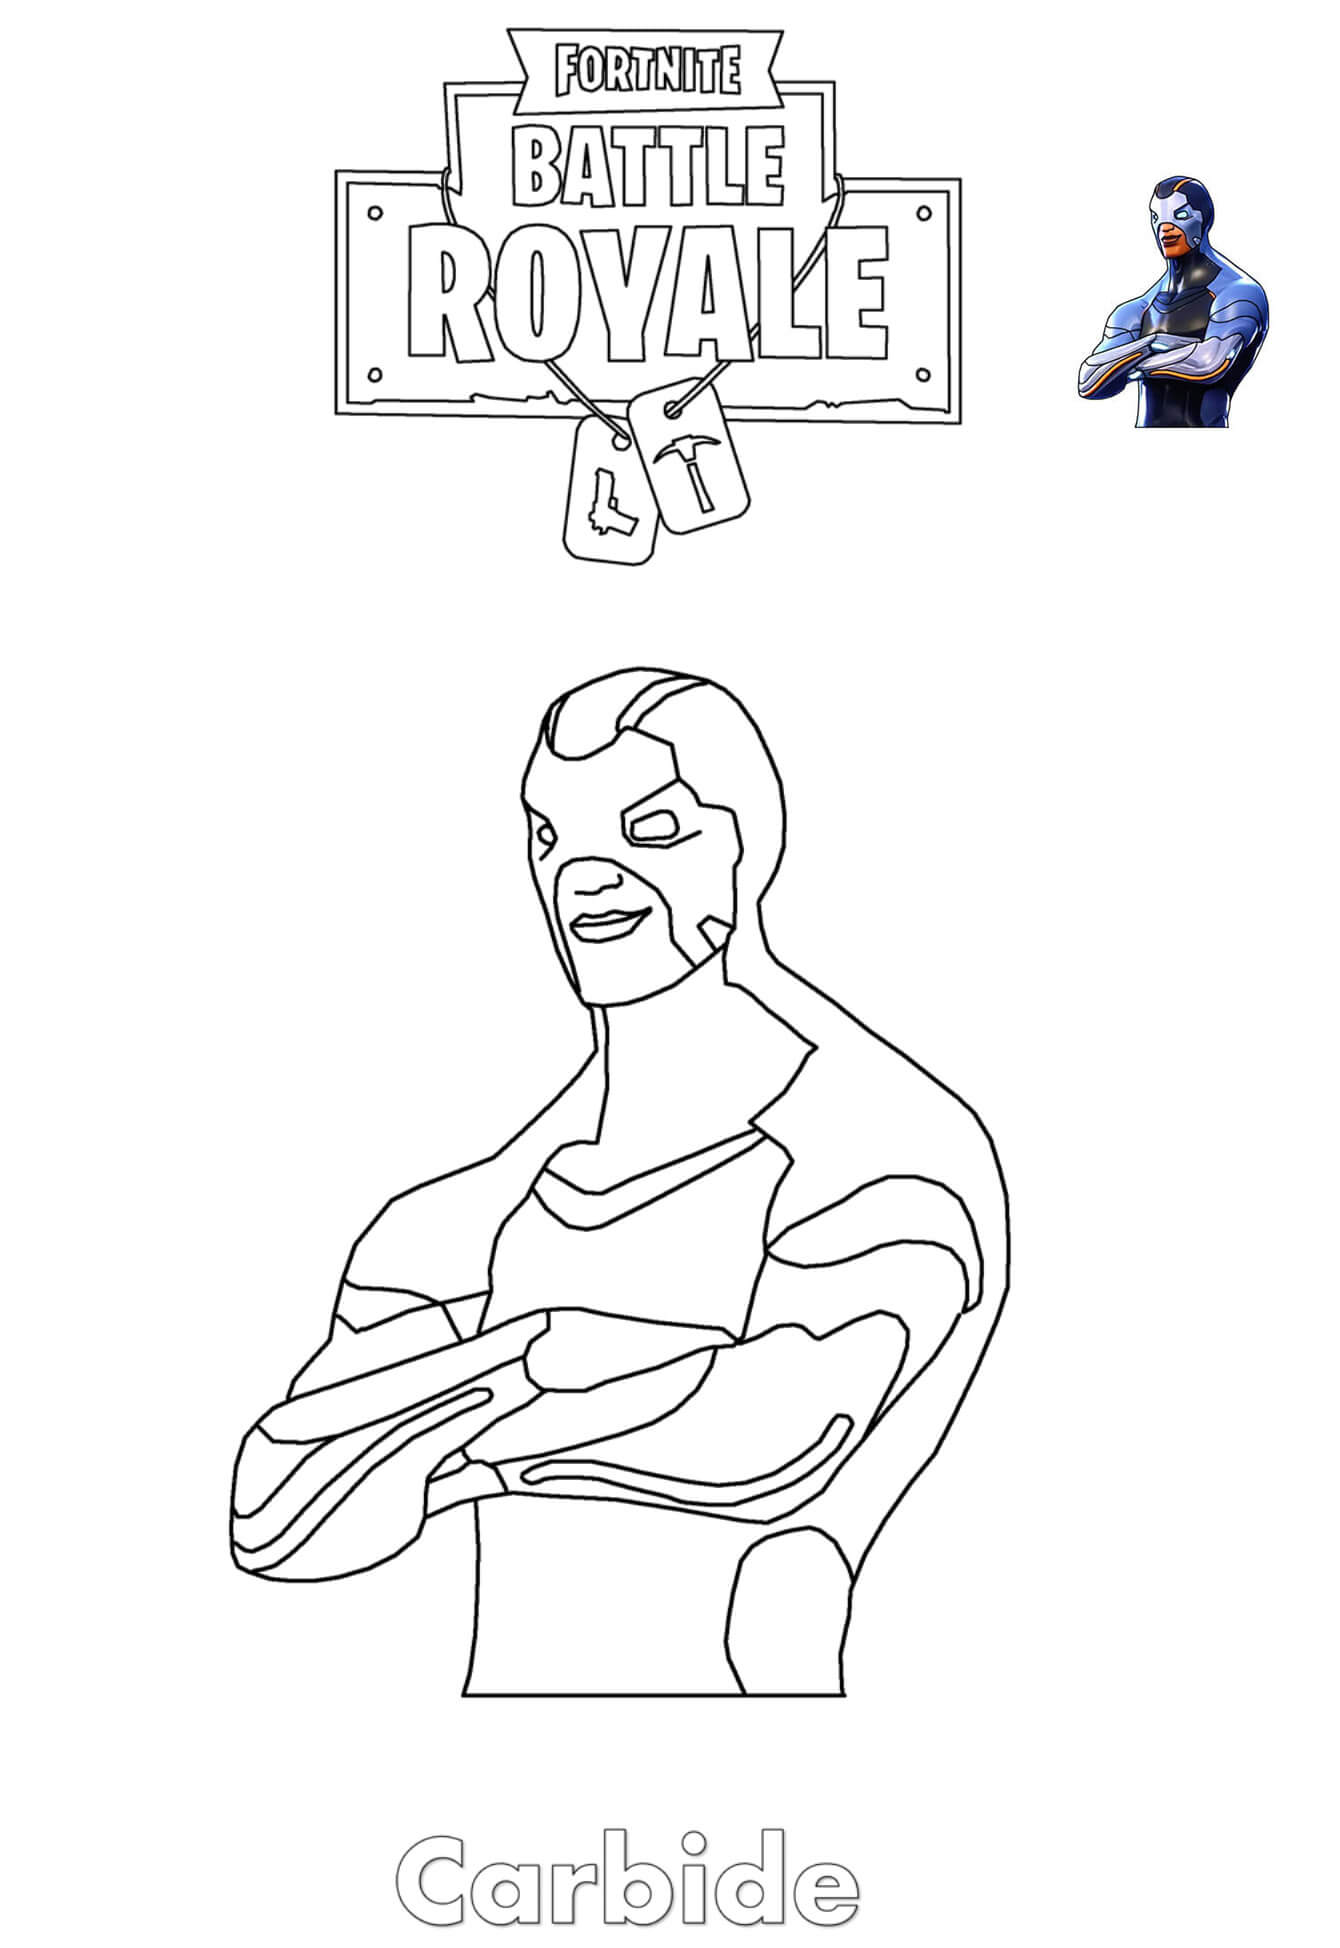 Carbide Fortnite Coloring Page